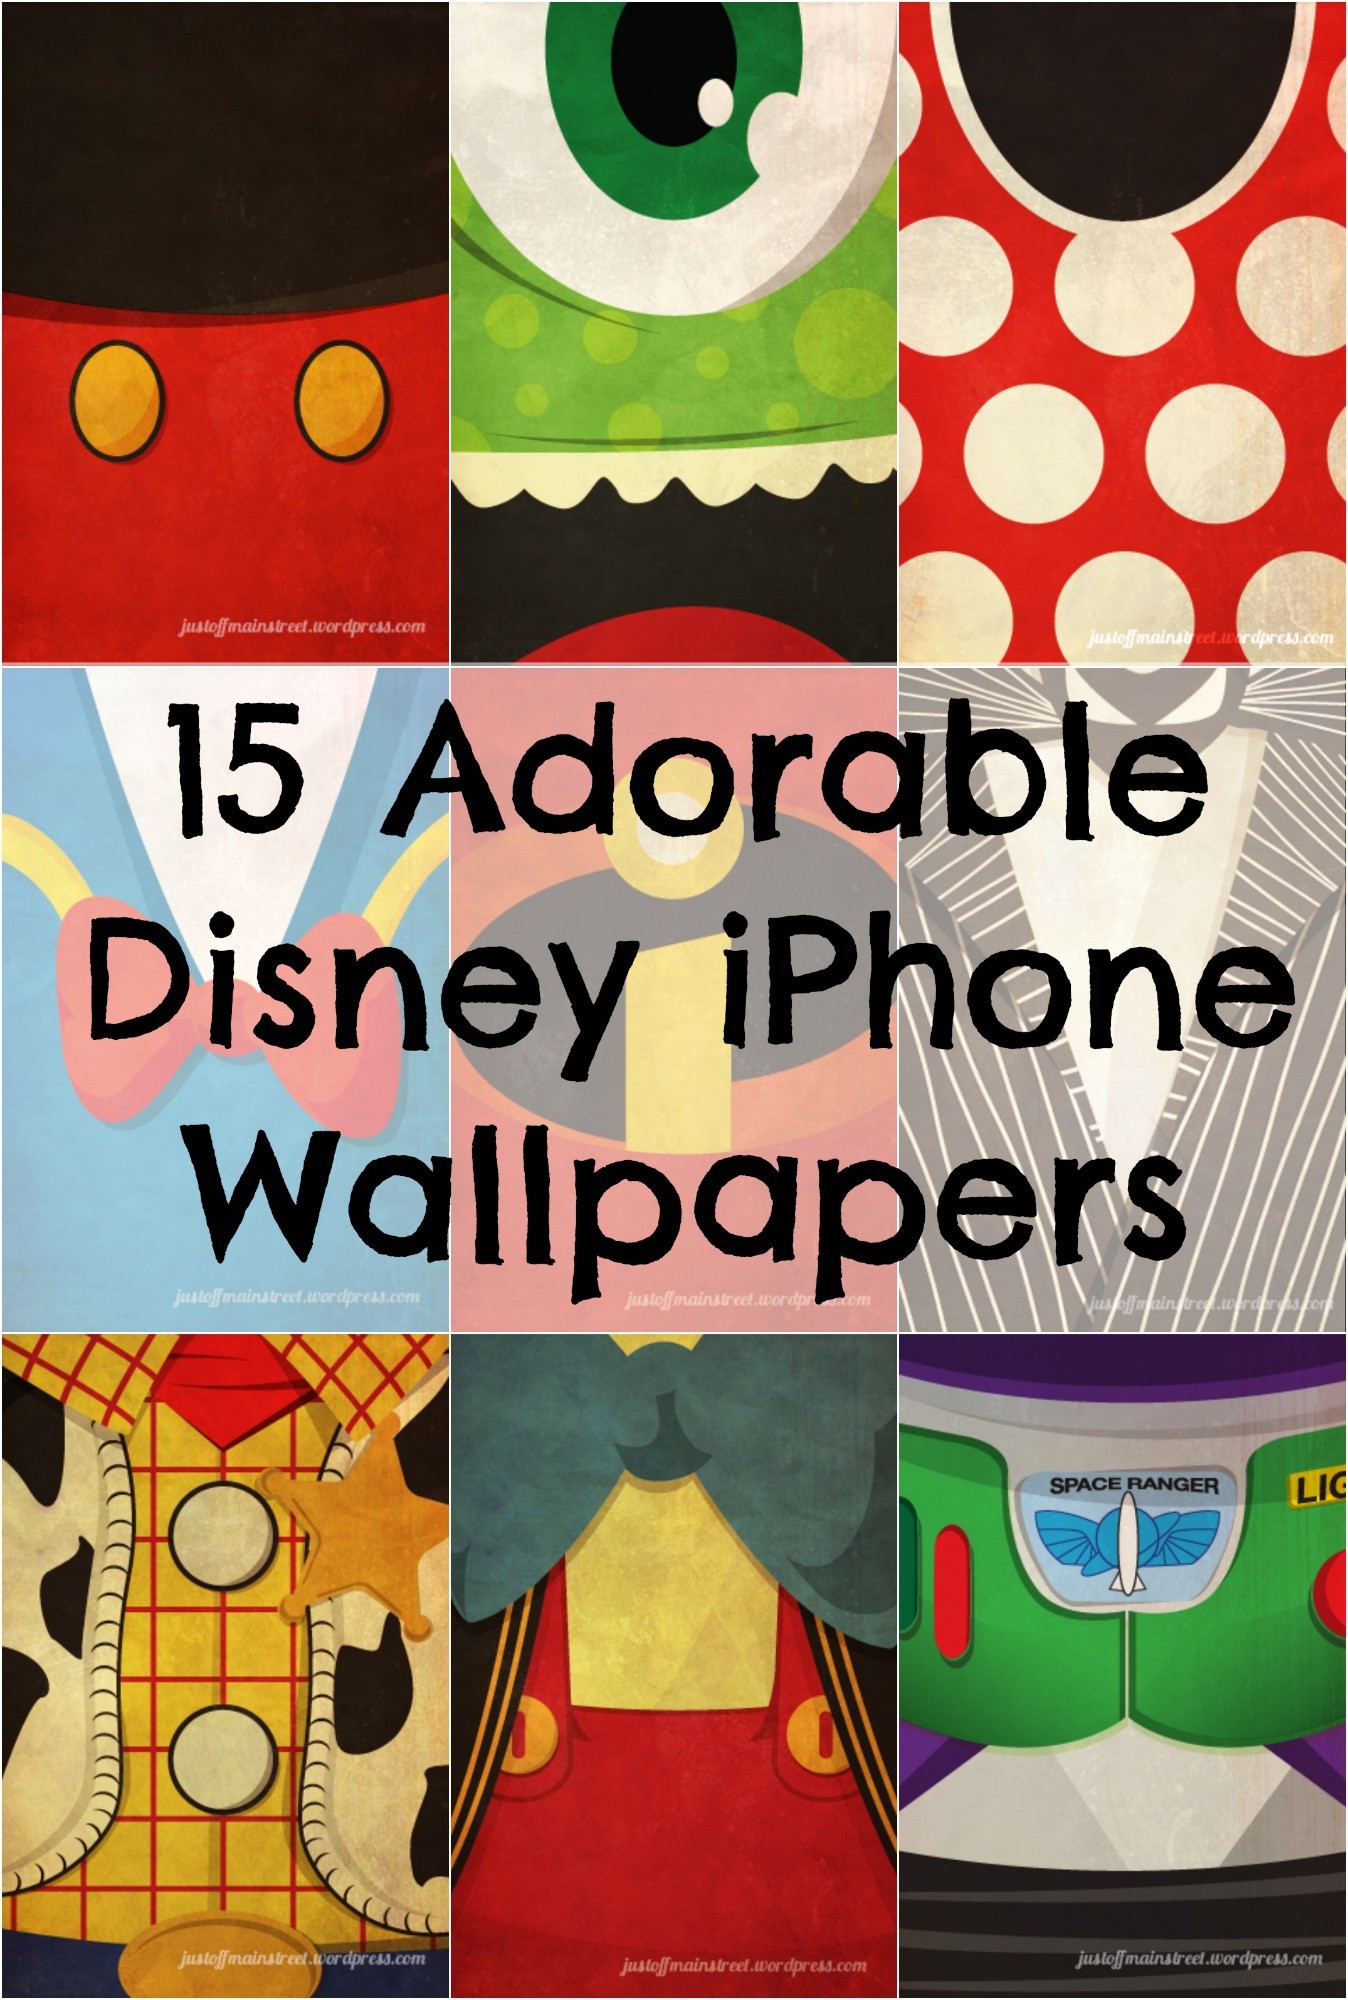 Disney Characters HD Wallpapers 1000 Free Disney Characters Wallpaper  Images For All Devices